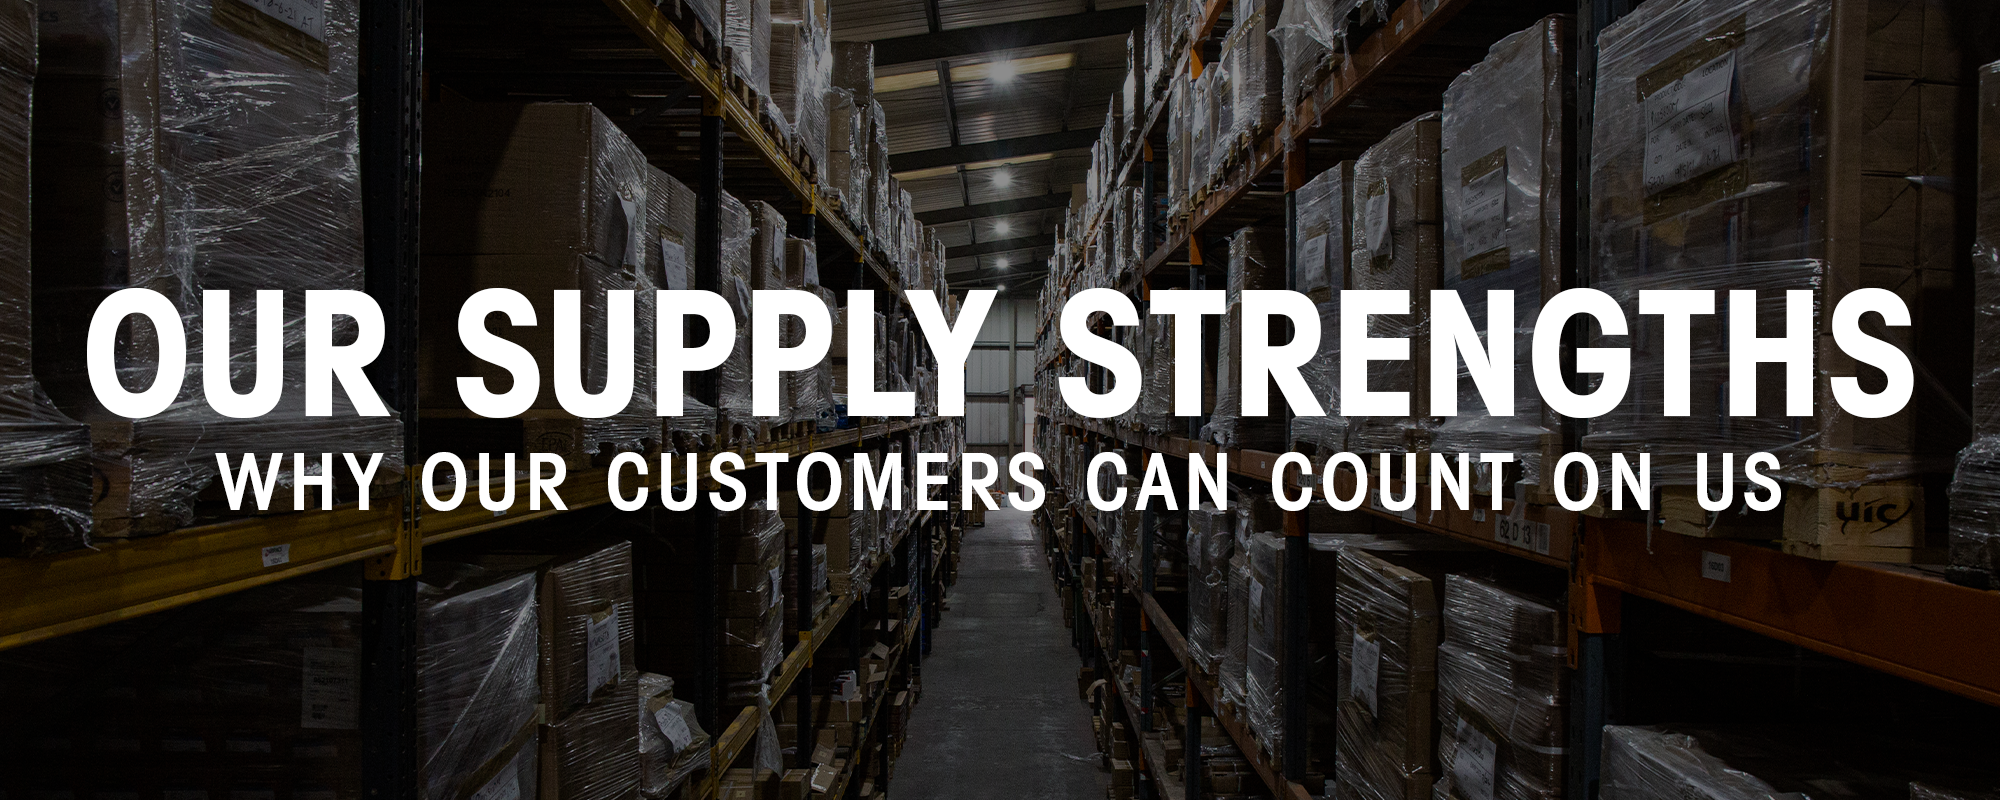 Our Supply Strengths, why our customers can count on us